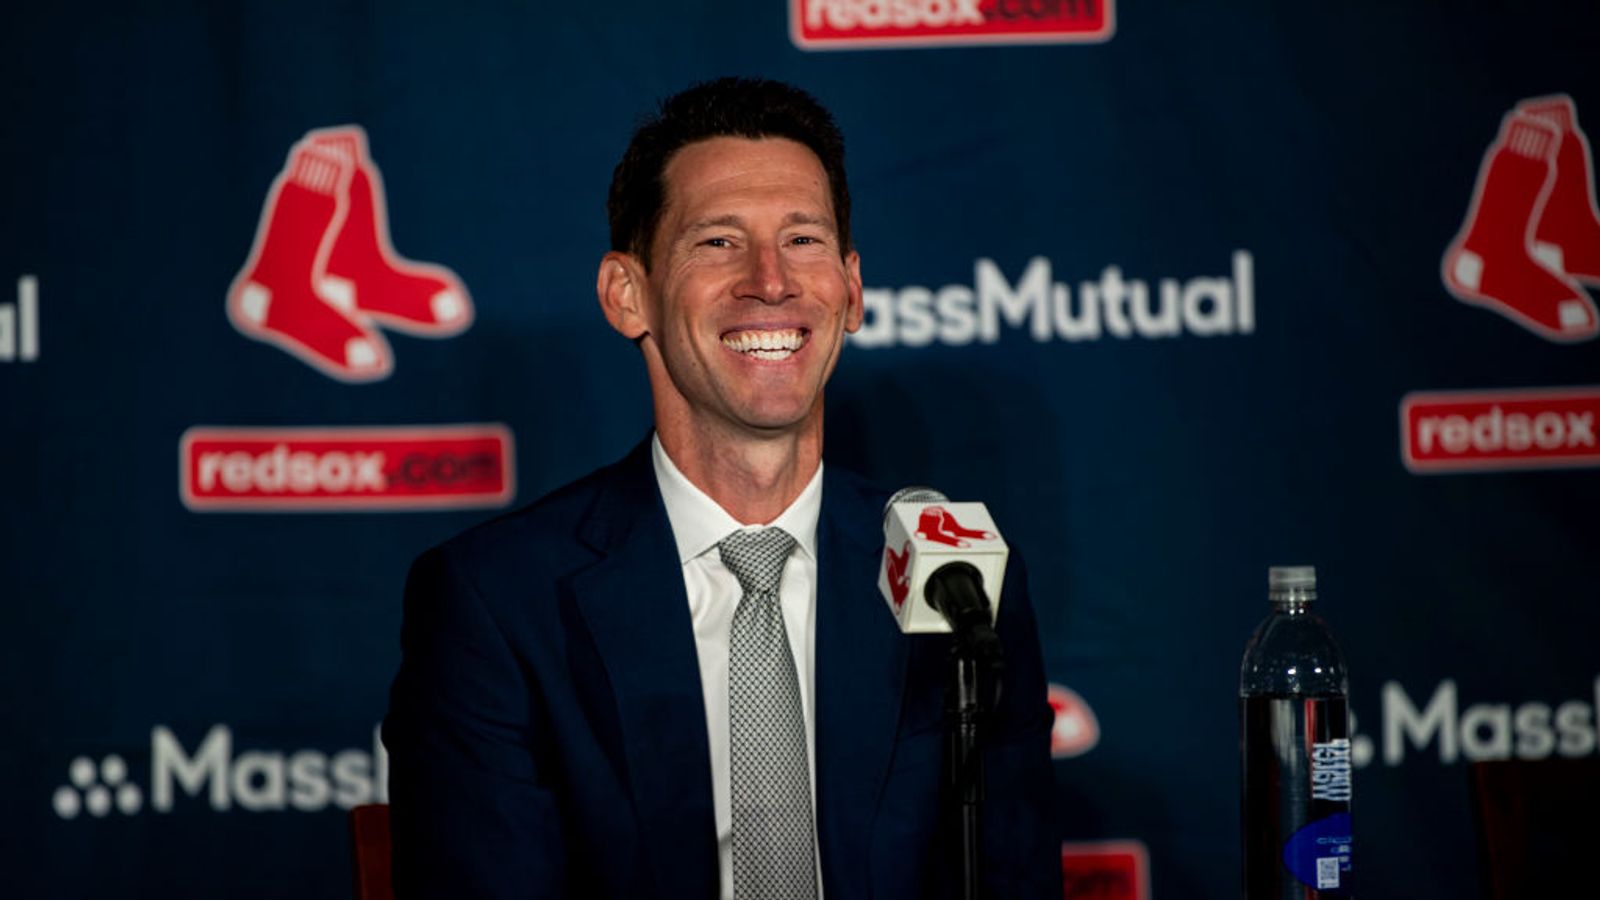 Coolbaugh: Craig Breslow exudes confidence, but will Red Sox give him tools  to succeed?